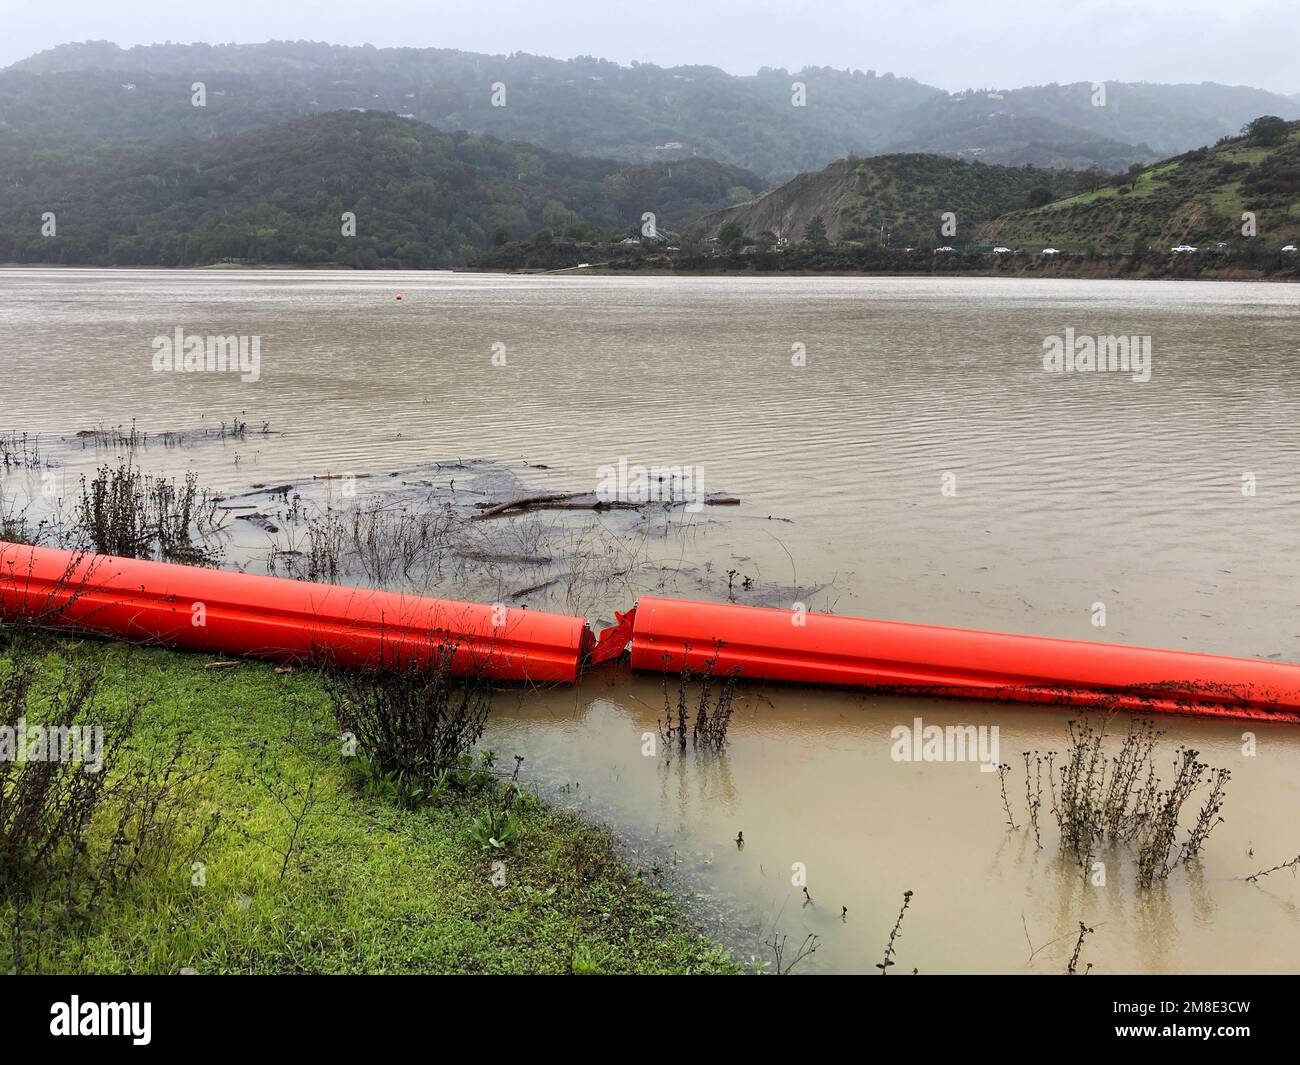 Orange floating debris boom, barrier on the green grass and in the water of a full reservoir during the rainy season Stock Photo